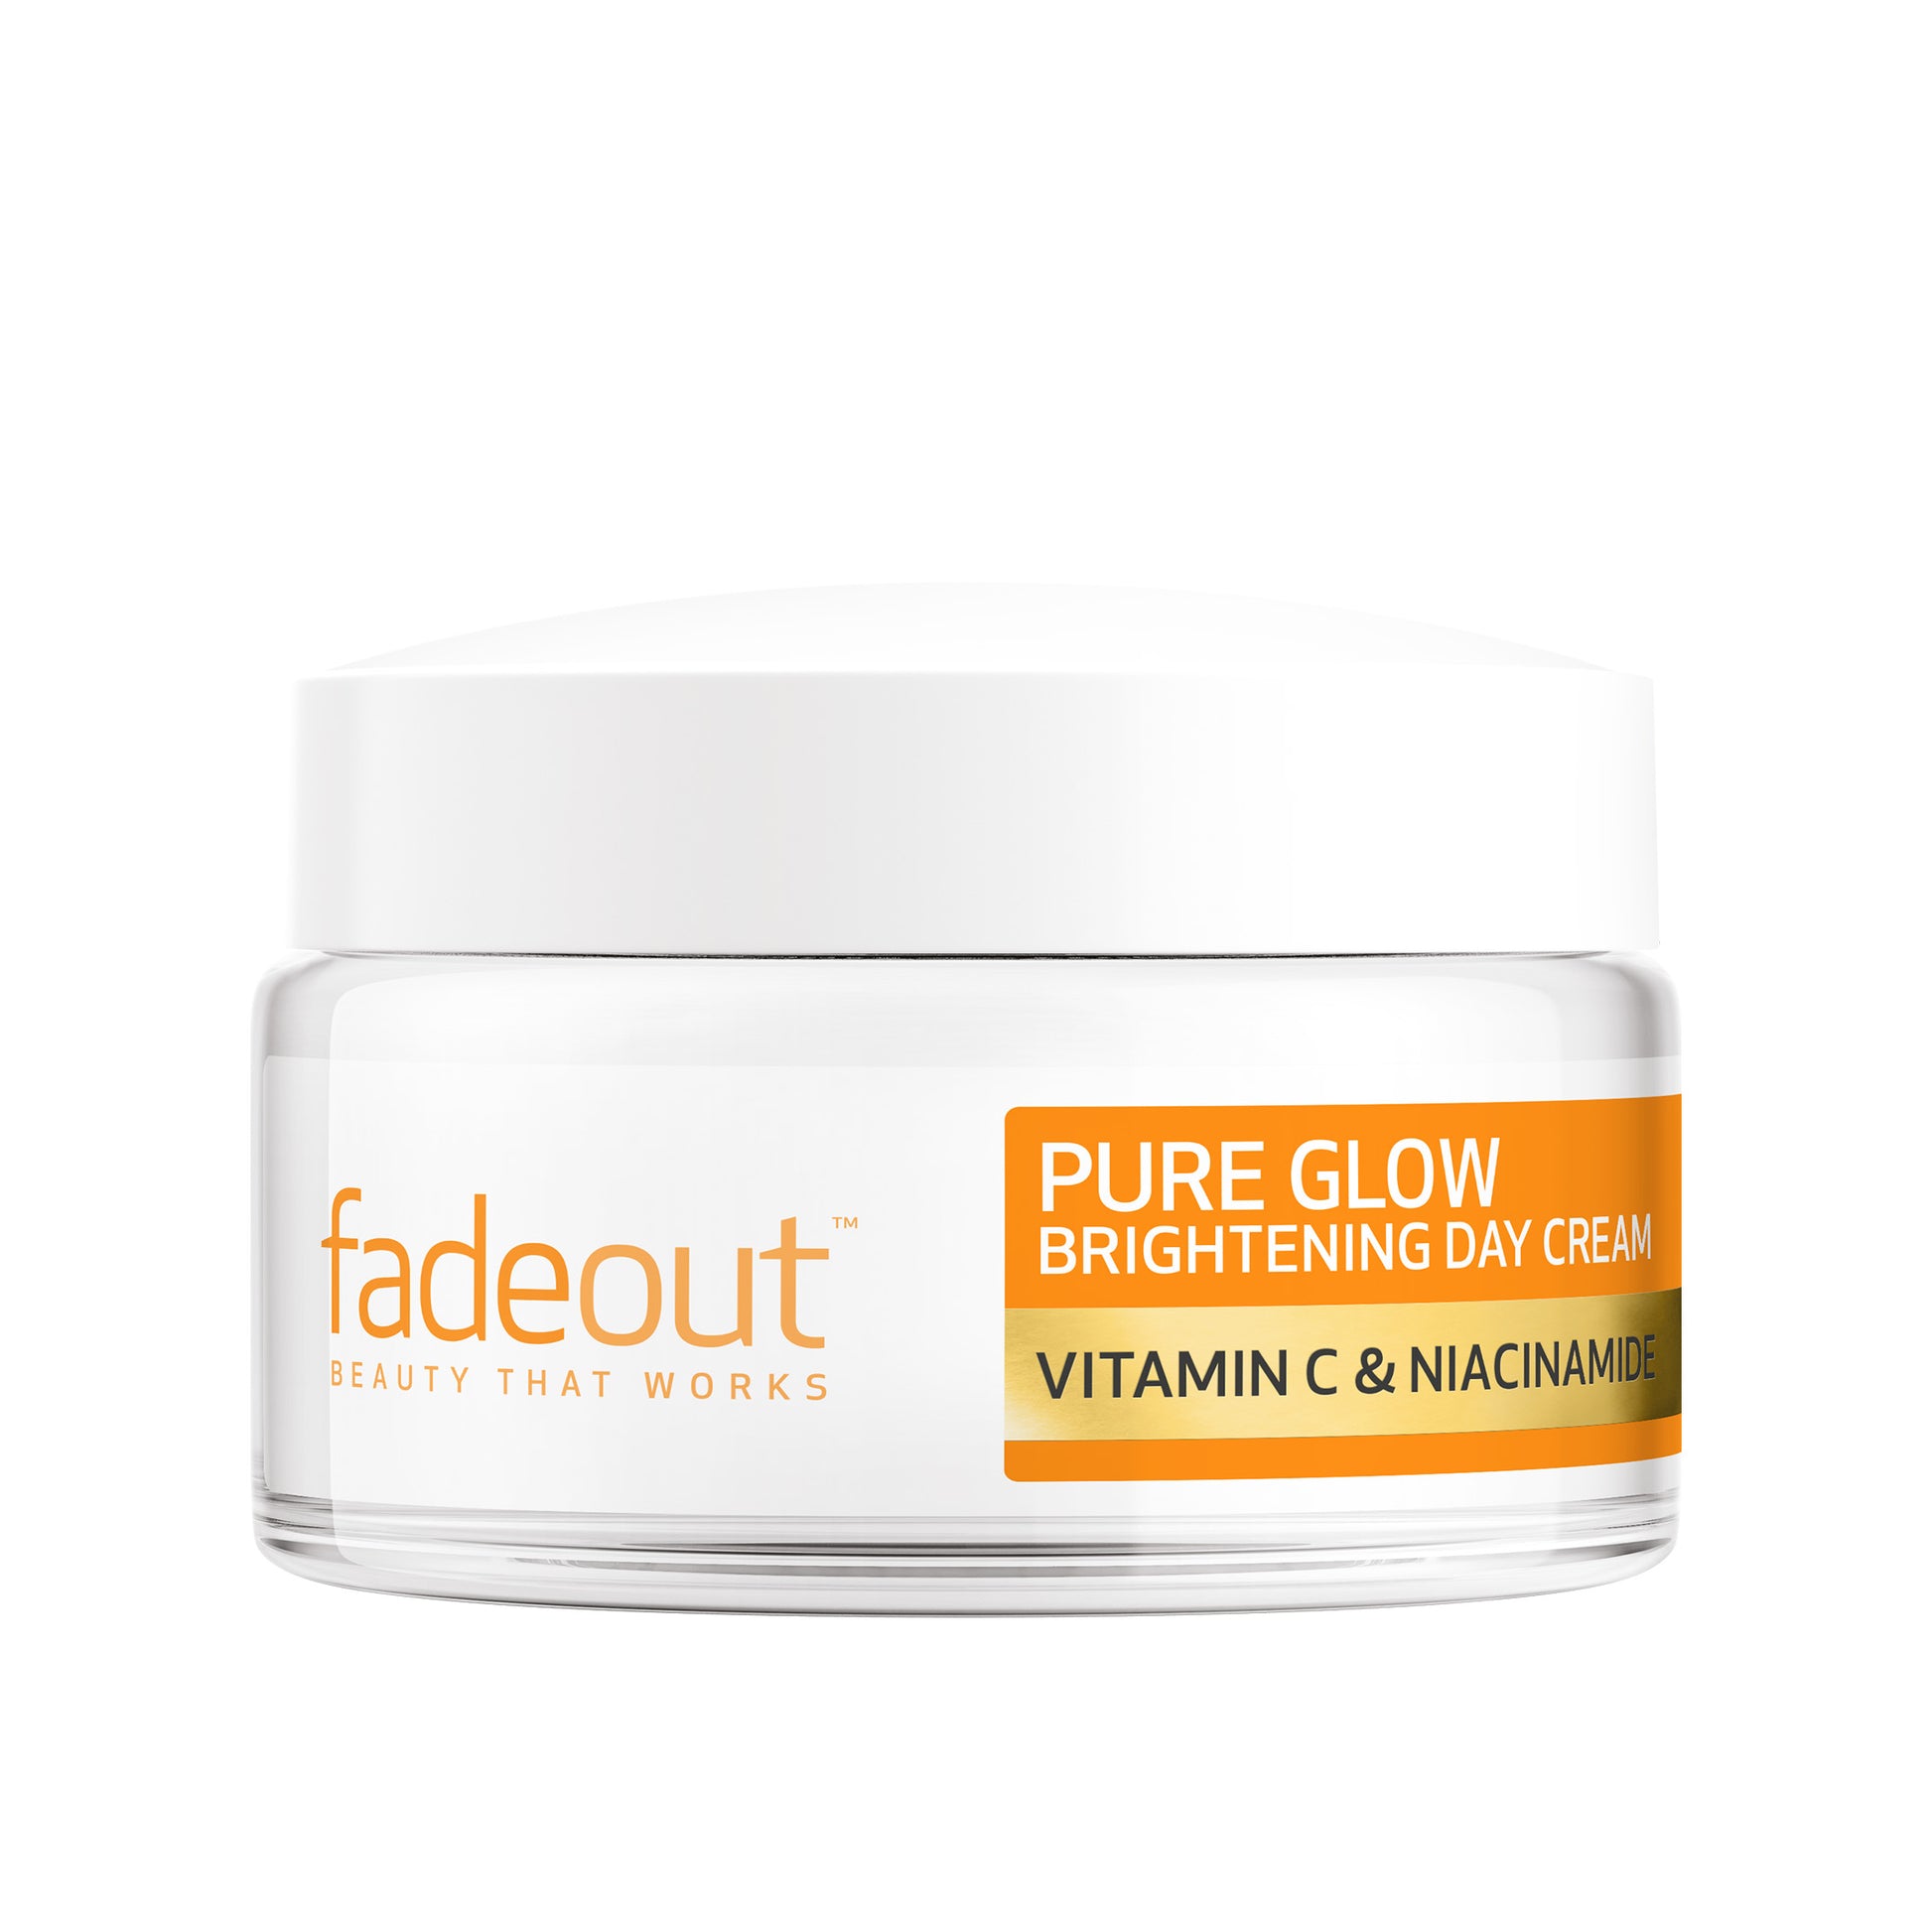 Pure Glow Brightening Day Cream - Fade Out Skincare